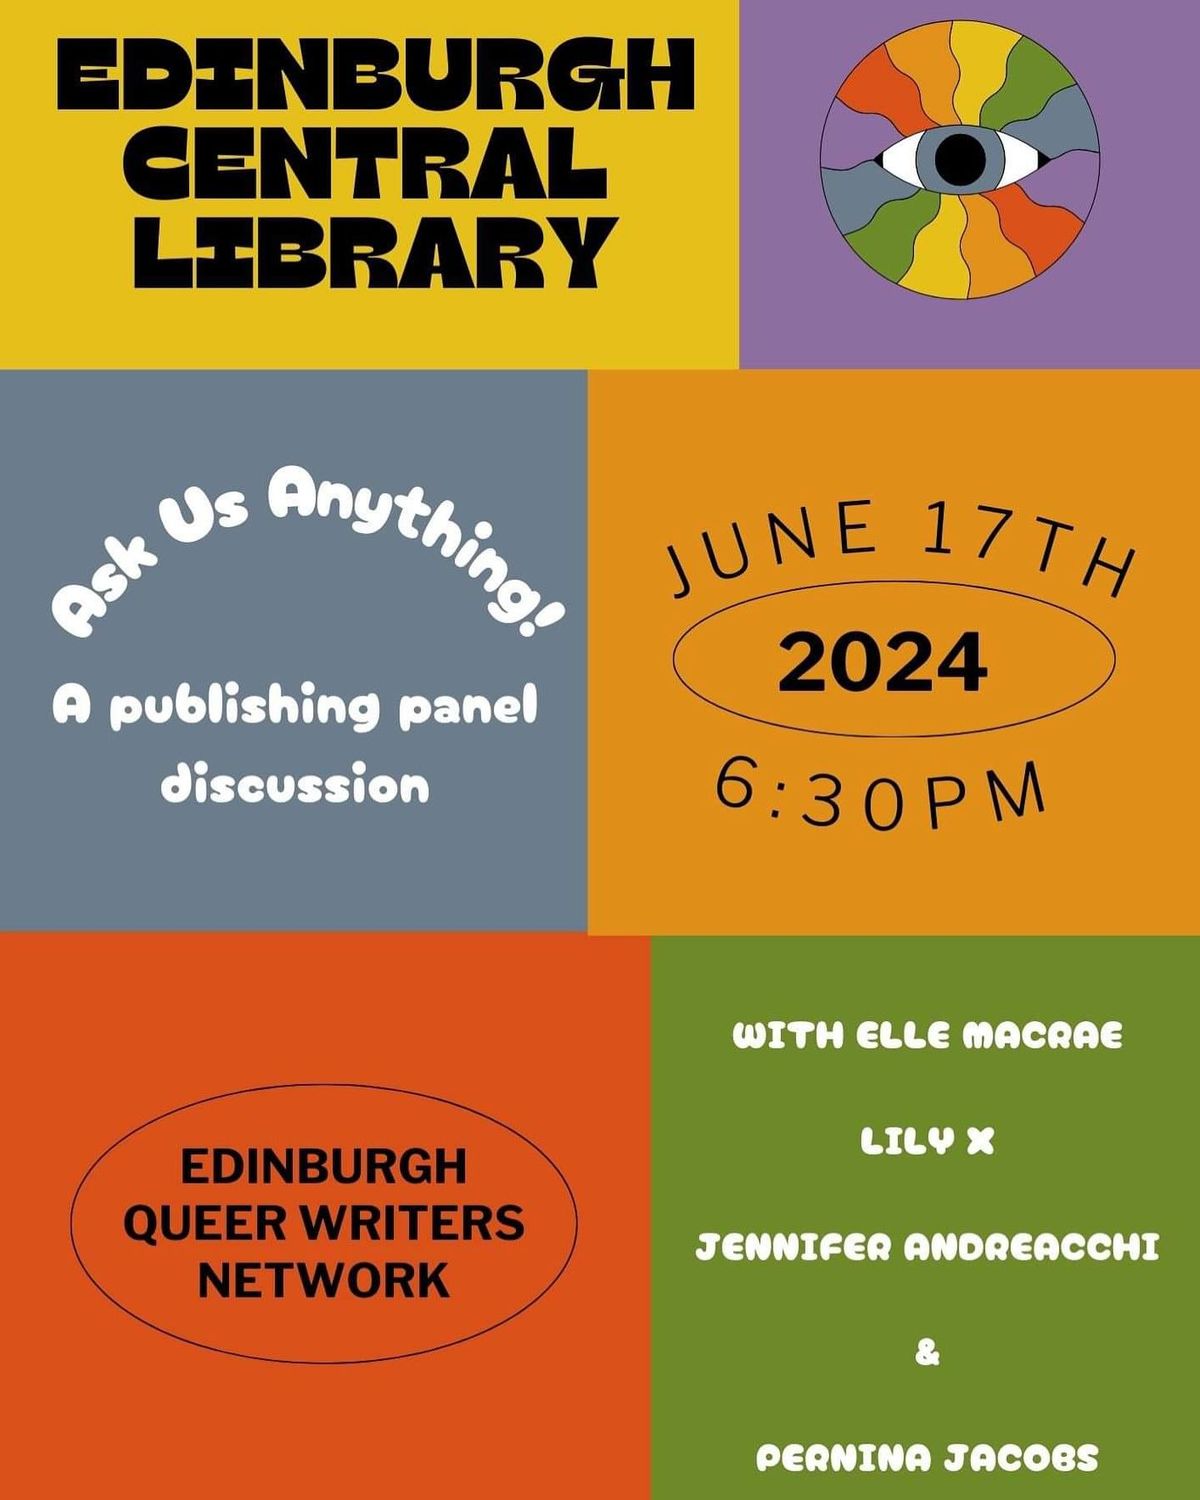 Ask Us Anything! Publishing insights panel in collaboration with Edinburgh Queer Writers Network